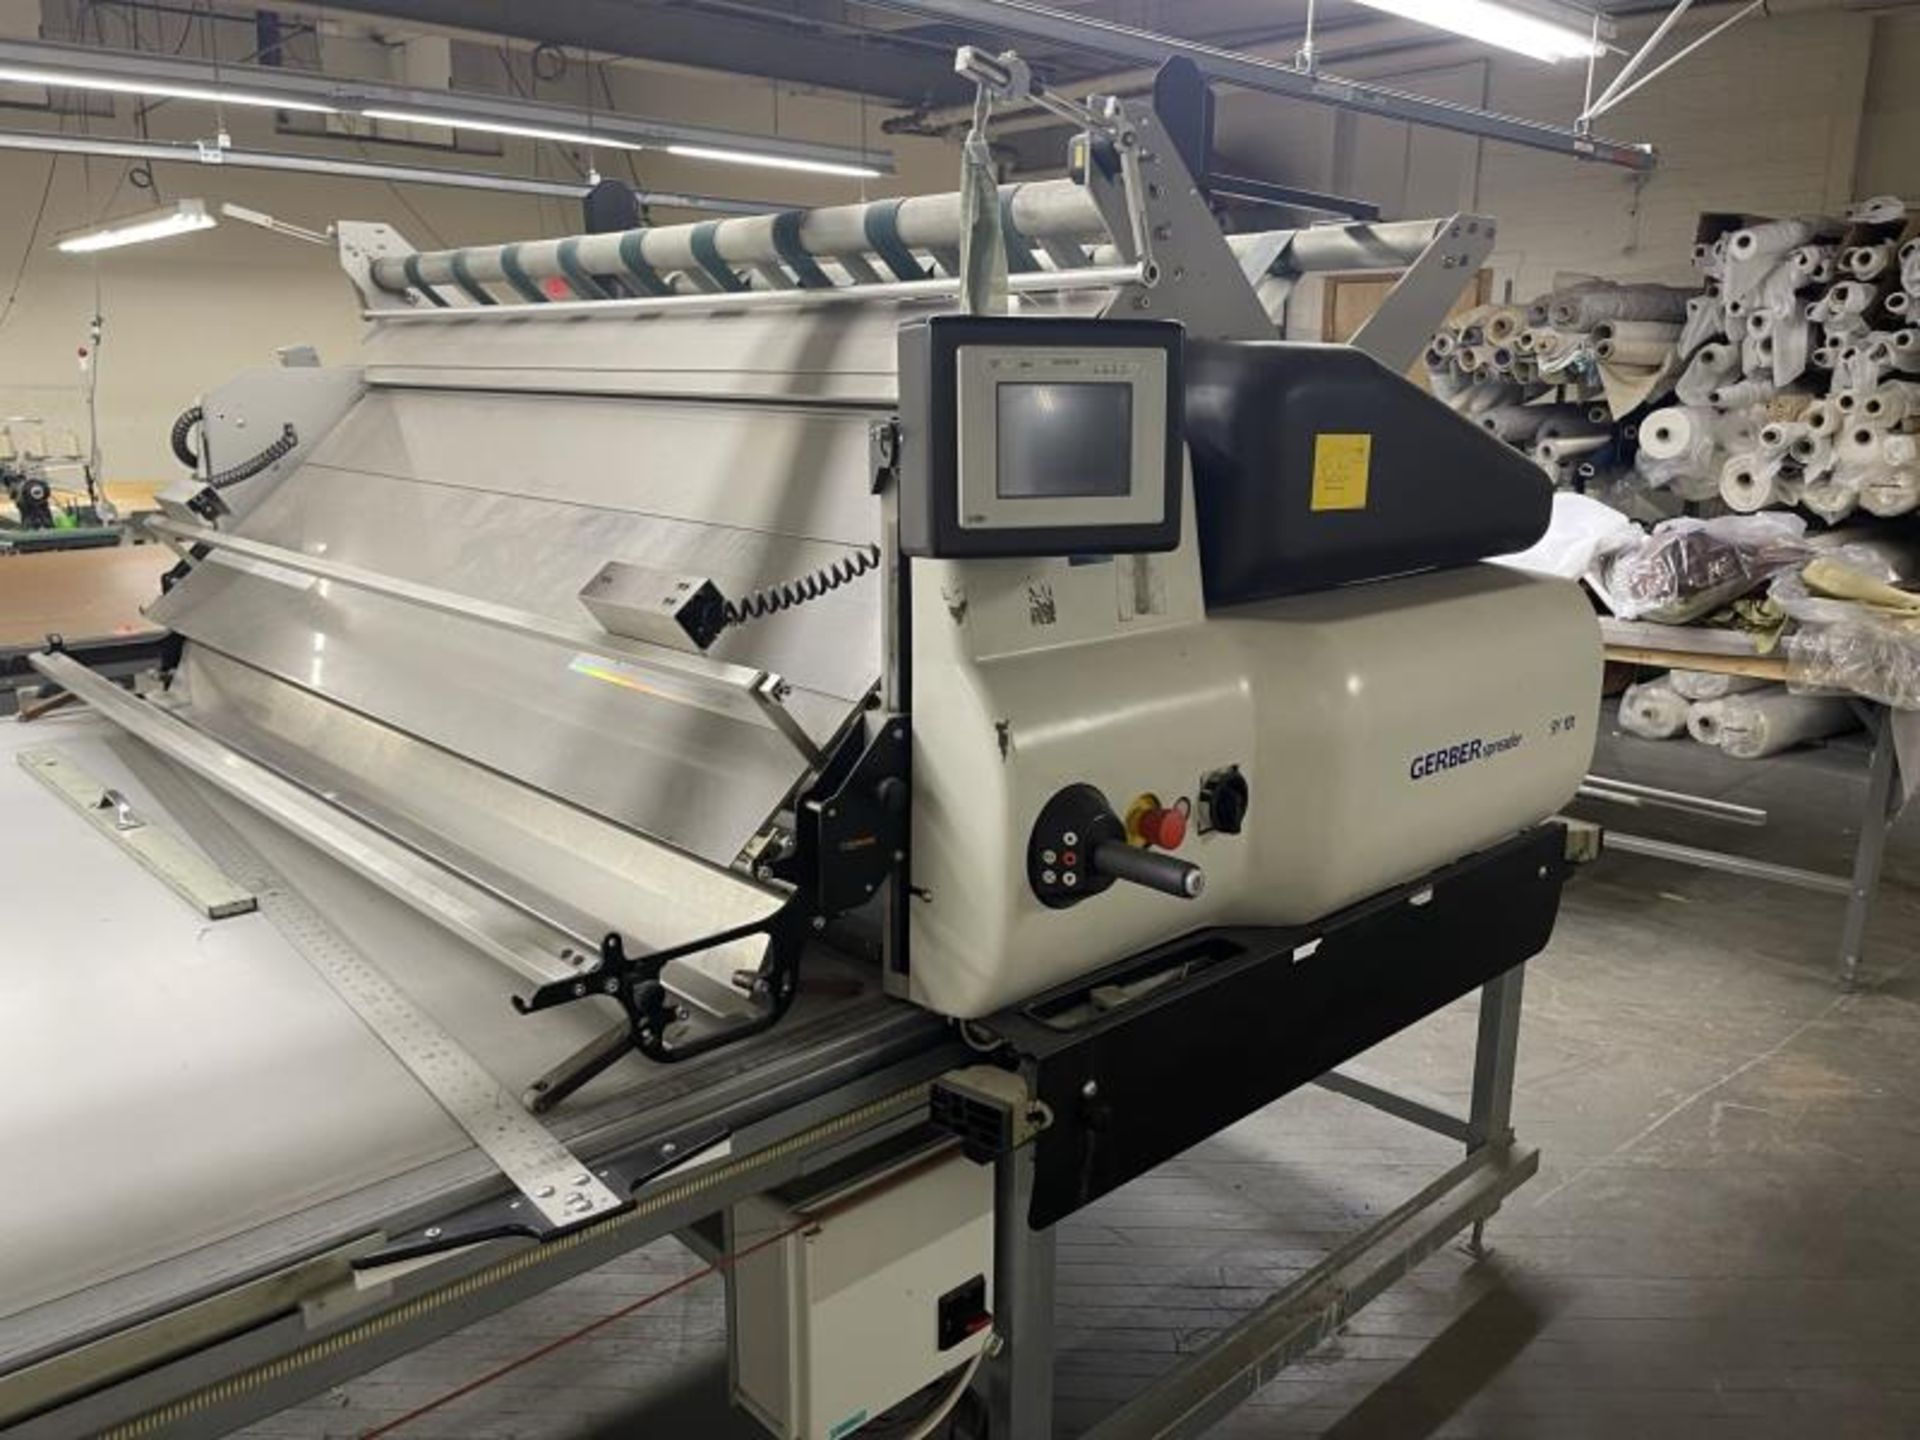 Gerber Spreader Machine with Transfer Table, Associated Equipment M: SY-101-1804 SN: 6405 - Image 5 of 10